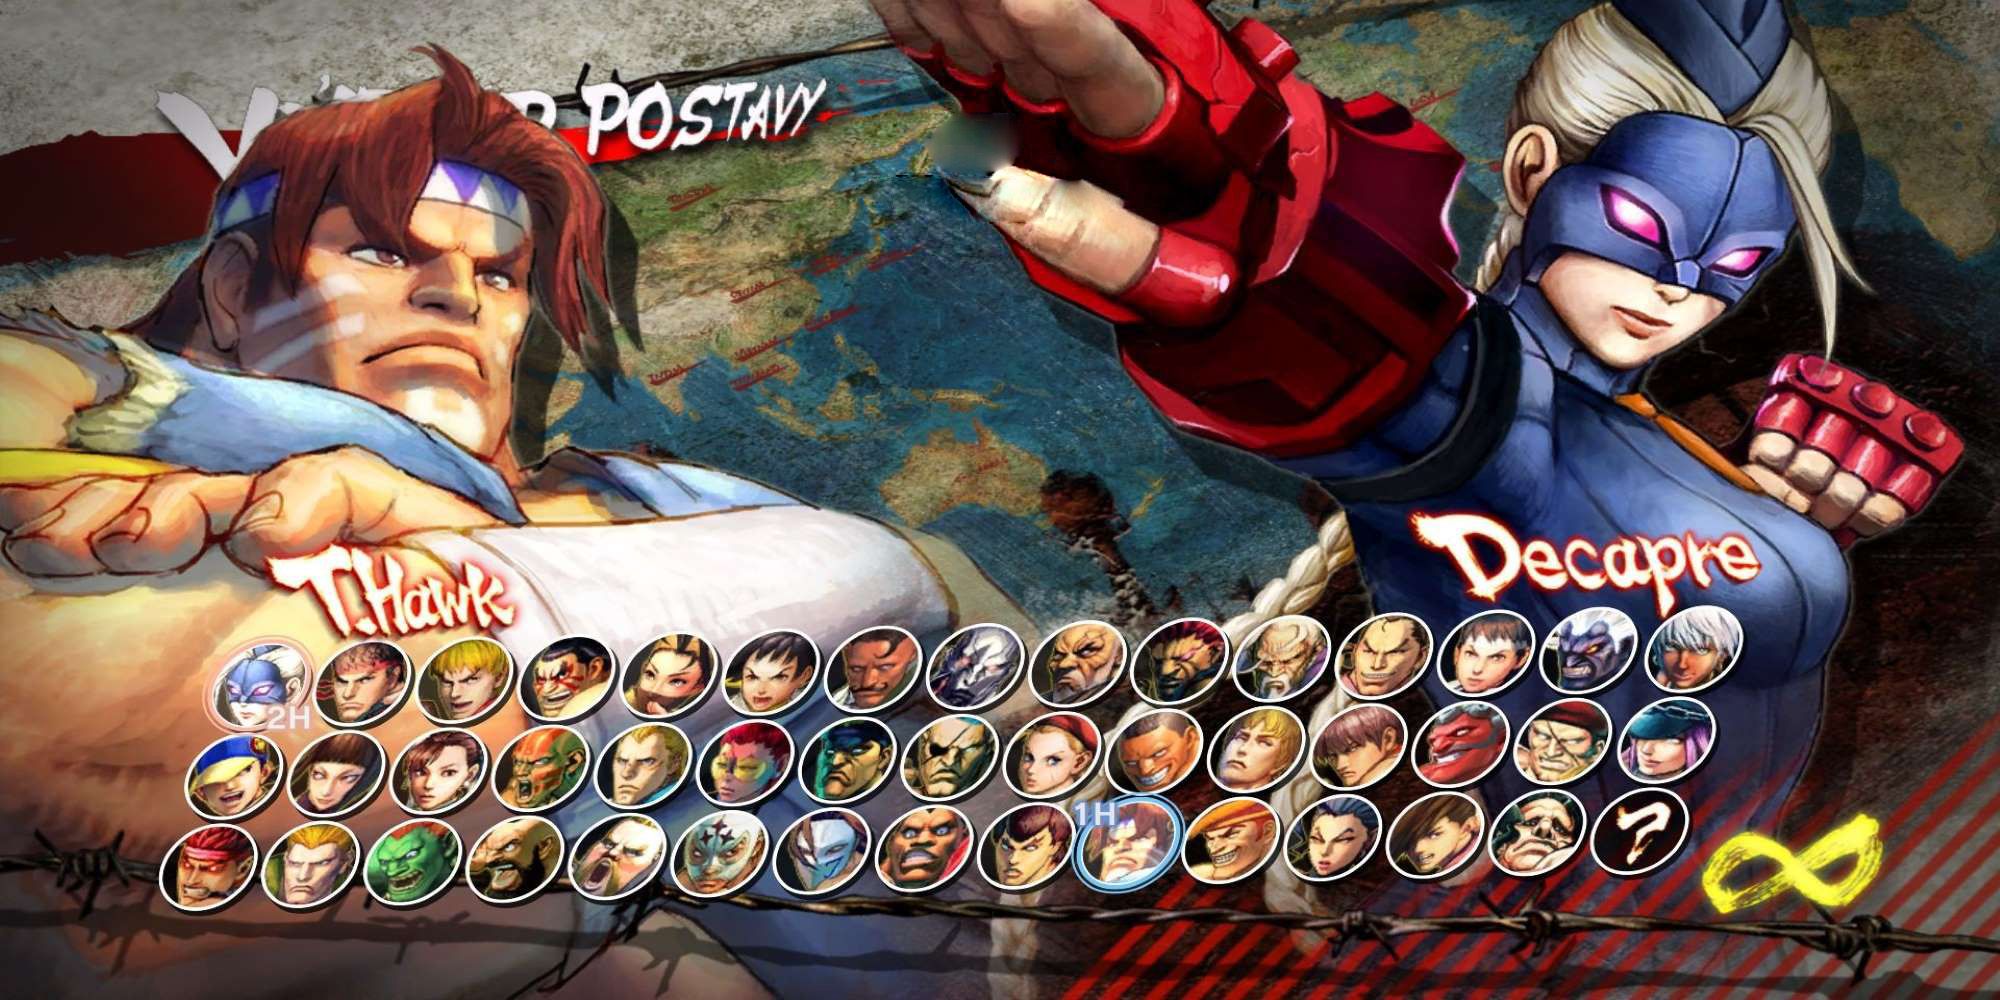 Forty-four world warriors grace a map in Ultra Street Fighter 4's character select screen. Player 1 has chosen T Hawk. Player 2 has chosen Decapre.